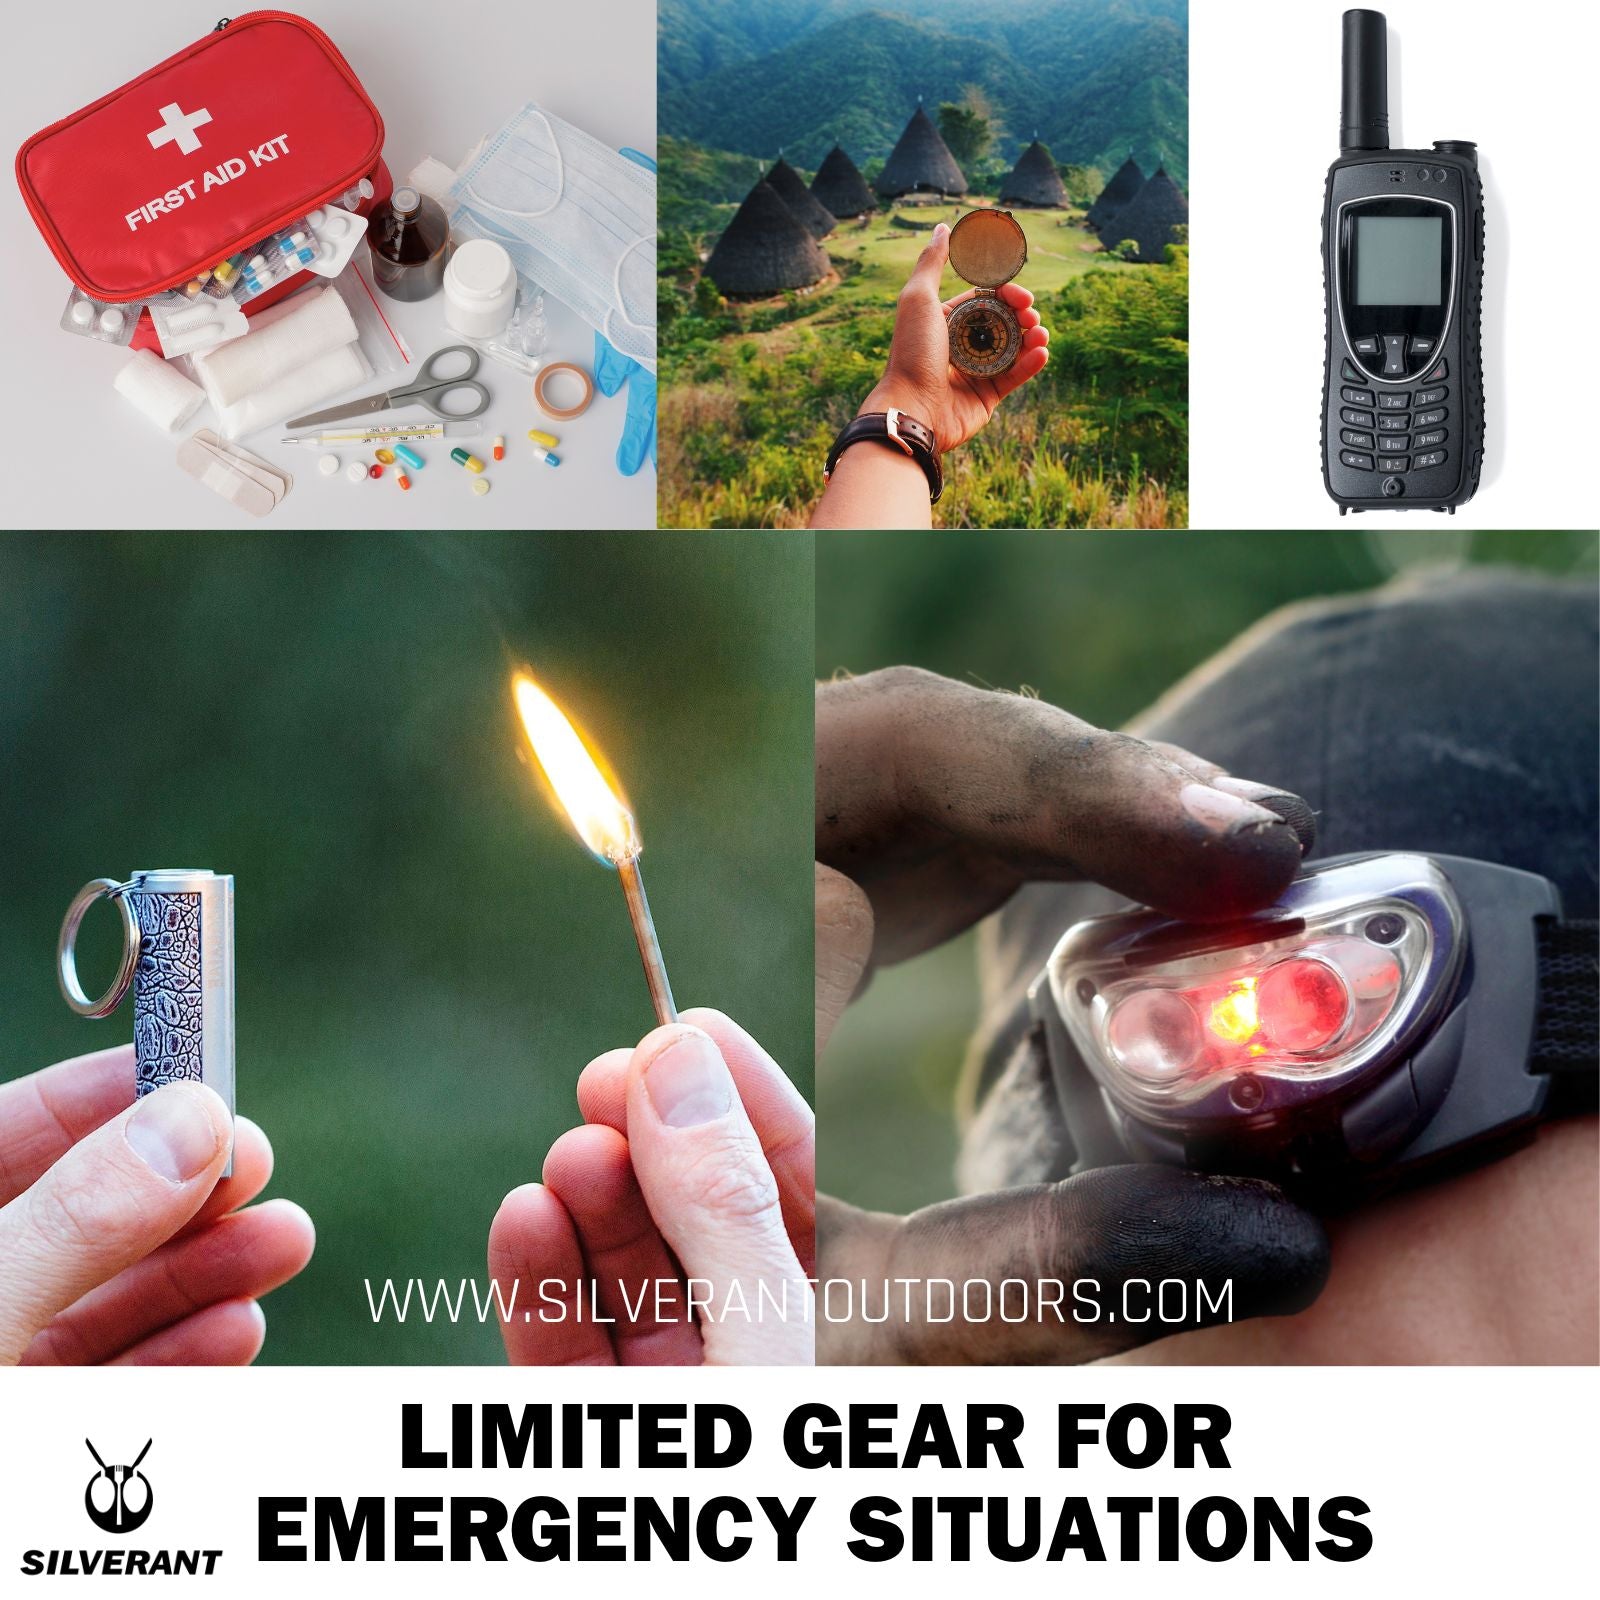 Limited Gear for Emergency Situations